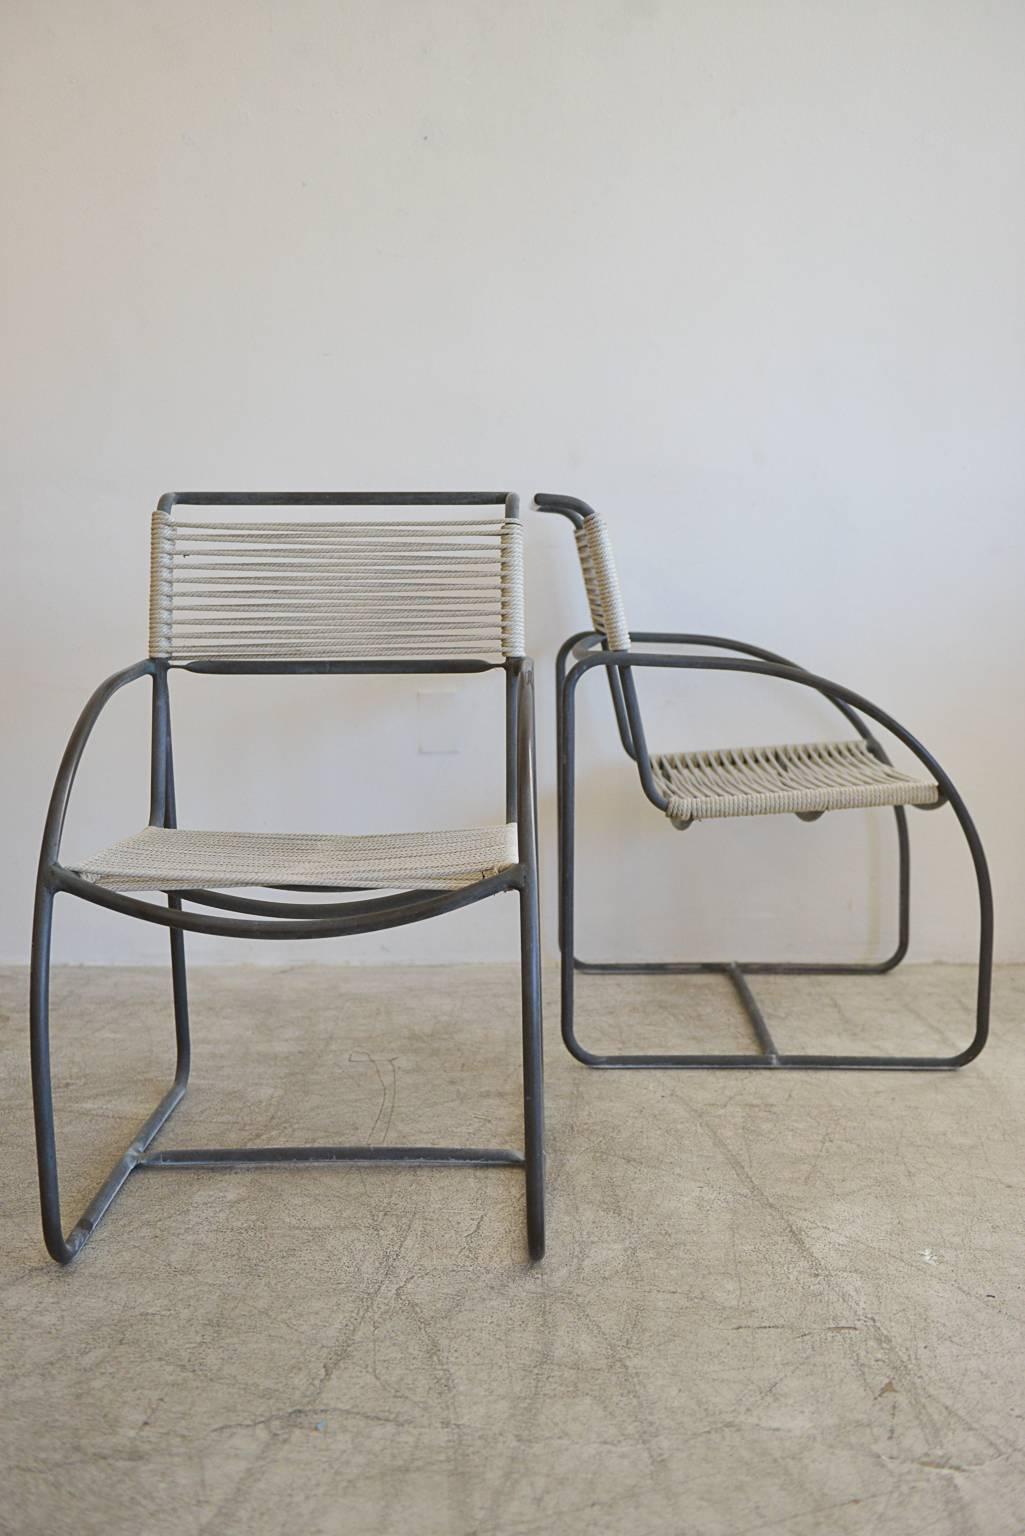 Important pair of tubular bronze and cotton cord patio lounge chairs designed by Kipp Stewart for Terra of California. Made of tubular bronze with cotton rope cording, these are often misattributed to Walter Lamb's work. Only produced for a very